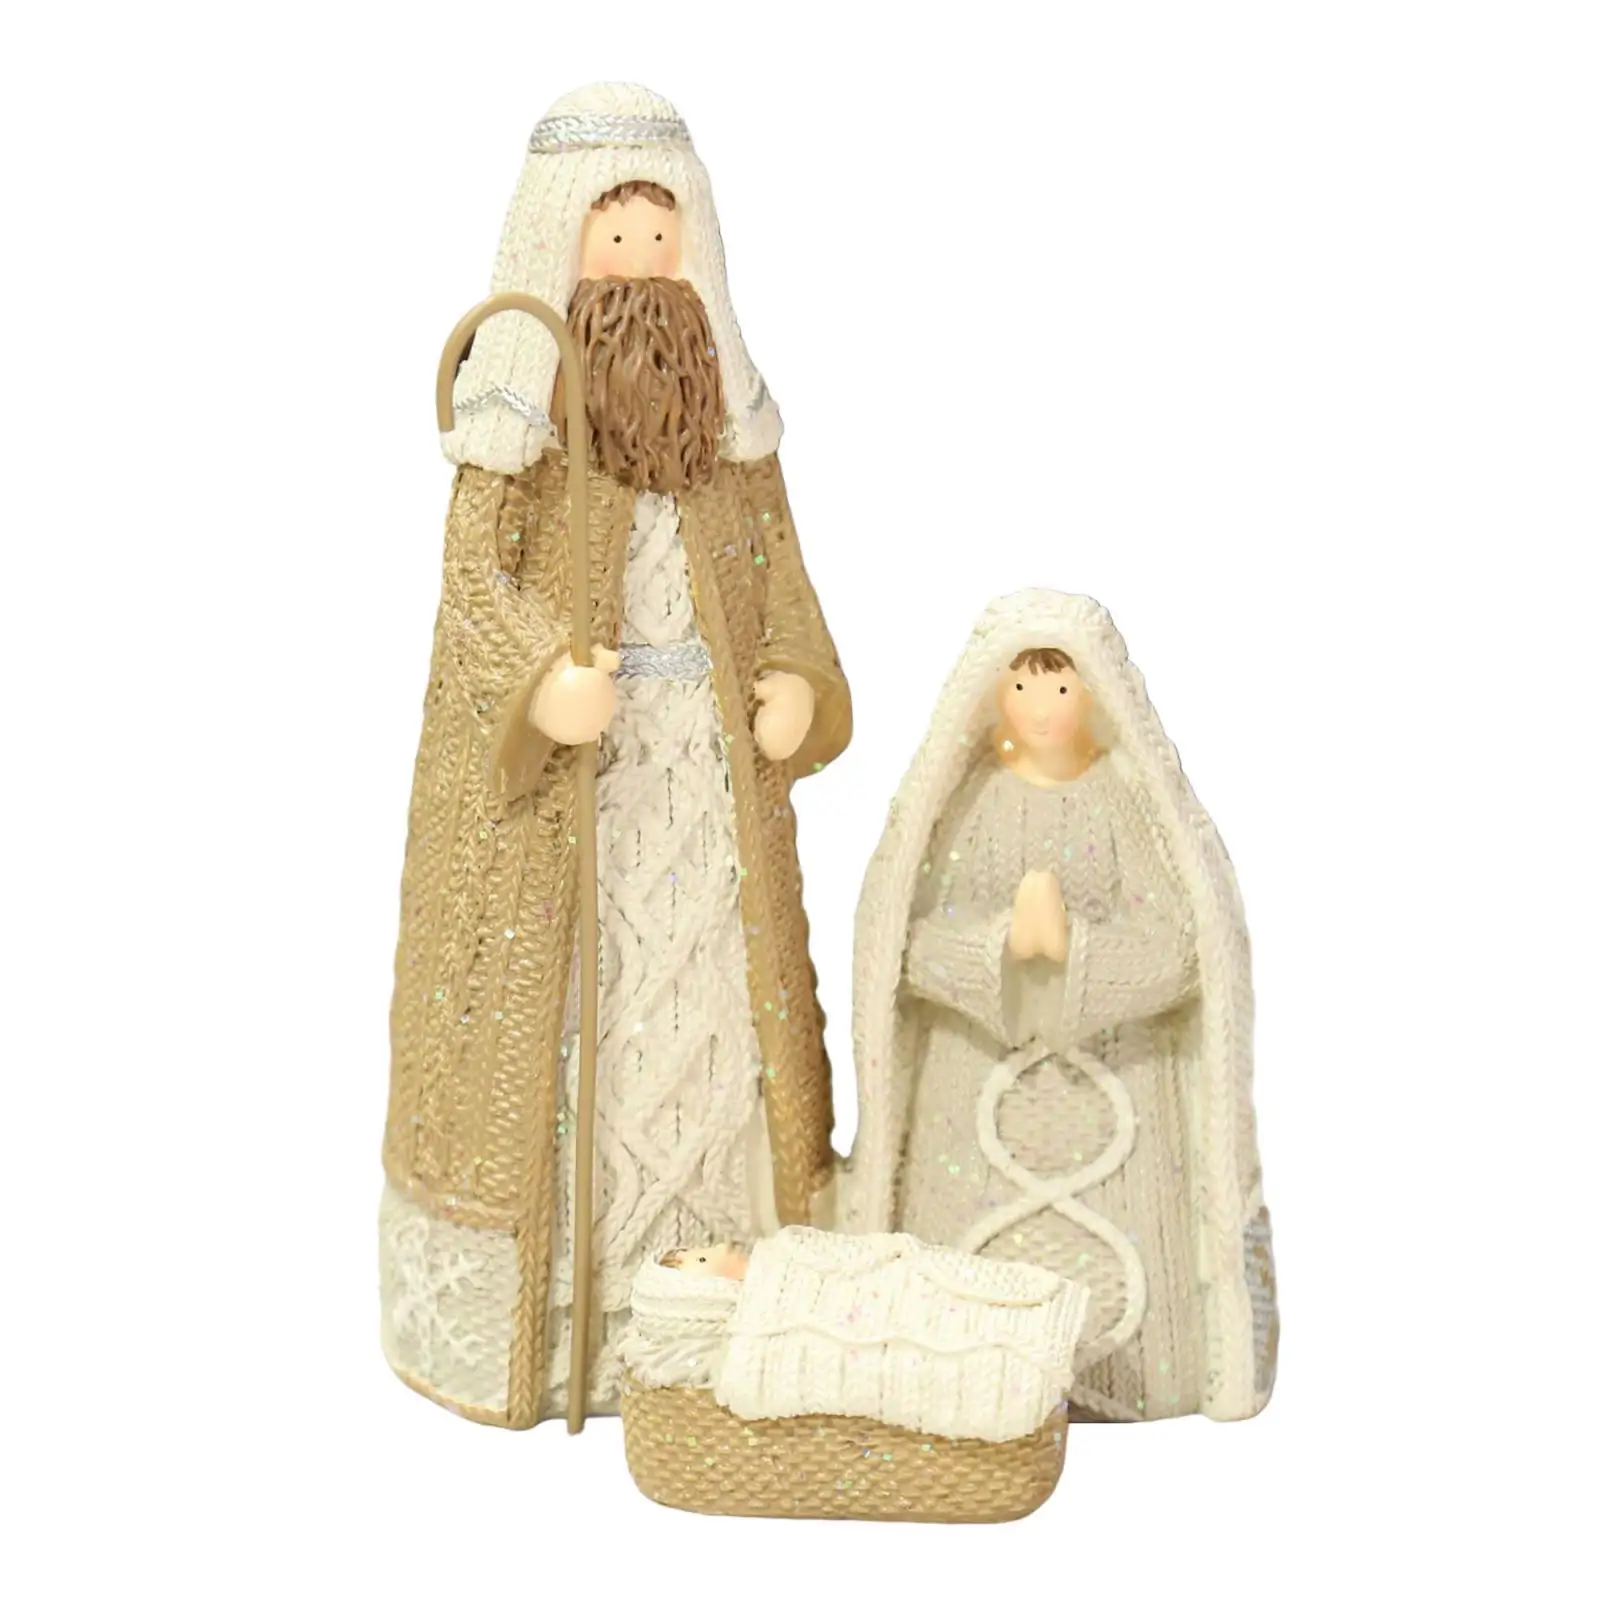 Holy Family Figurine Nativity Scene Ornament Sculpture for Living Room Decoration